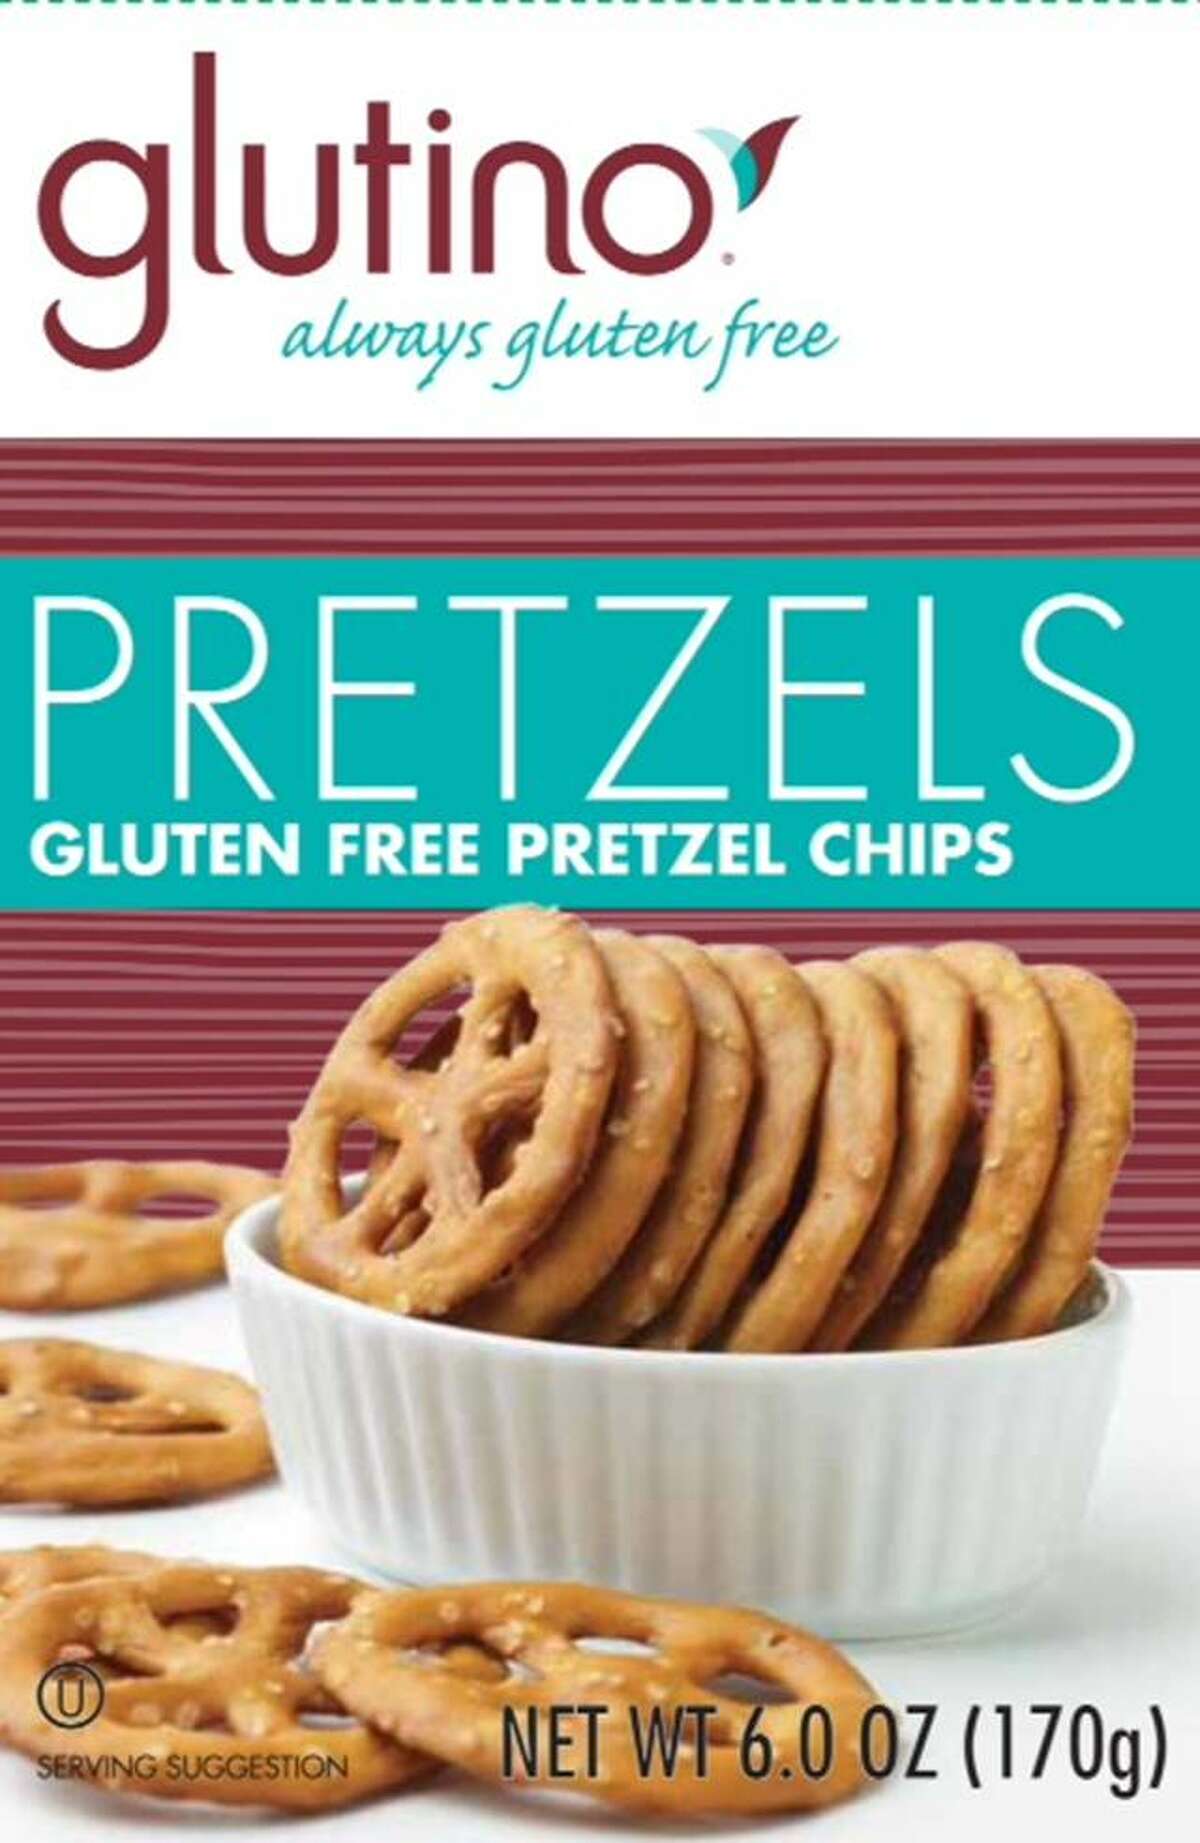 This undated handout photo provided by the Food and Drug Administration (FDA) shows a gluten free labeling on a box of pretzel chips. Consumers are going to know exactly what they are getting when they buy foods labeled "gluten free." The FDA is at last defining what a "gluten free" label on a food package really means after more than six years of consideration. Until now, manufacturers have been able to use their own discretion as to how much gluten they include. Under an FDA rule announced Friday, products labeled "gluten free" still won't have to be technically free of wheat, rye and barley and their derivatives. But they almost will: "Gluten-free" products will have to contain less than 20 parts per million of gluten. (AP Photo/FDA)